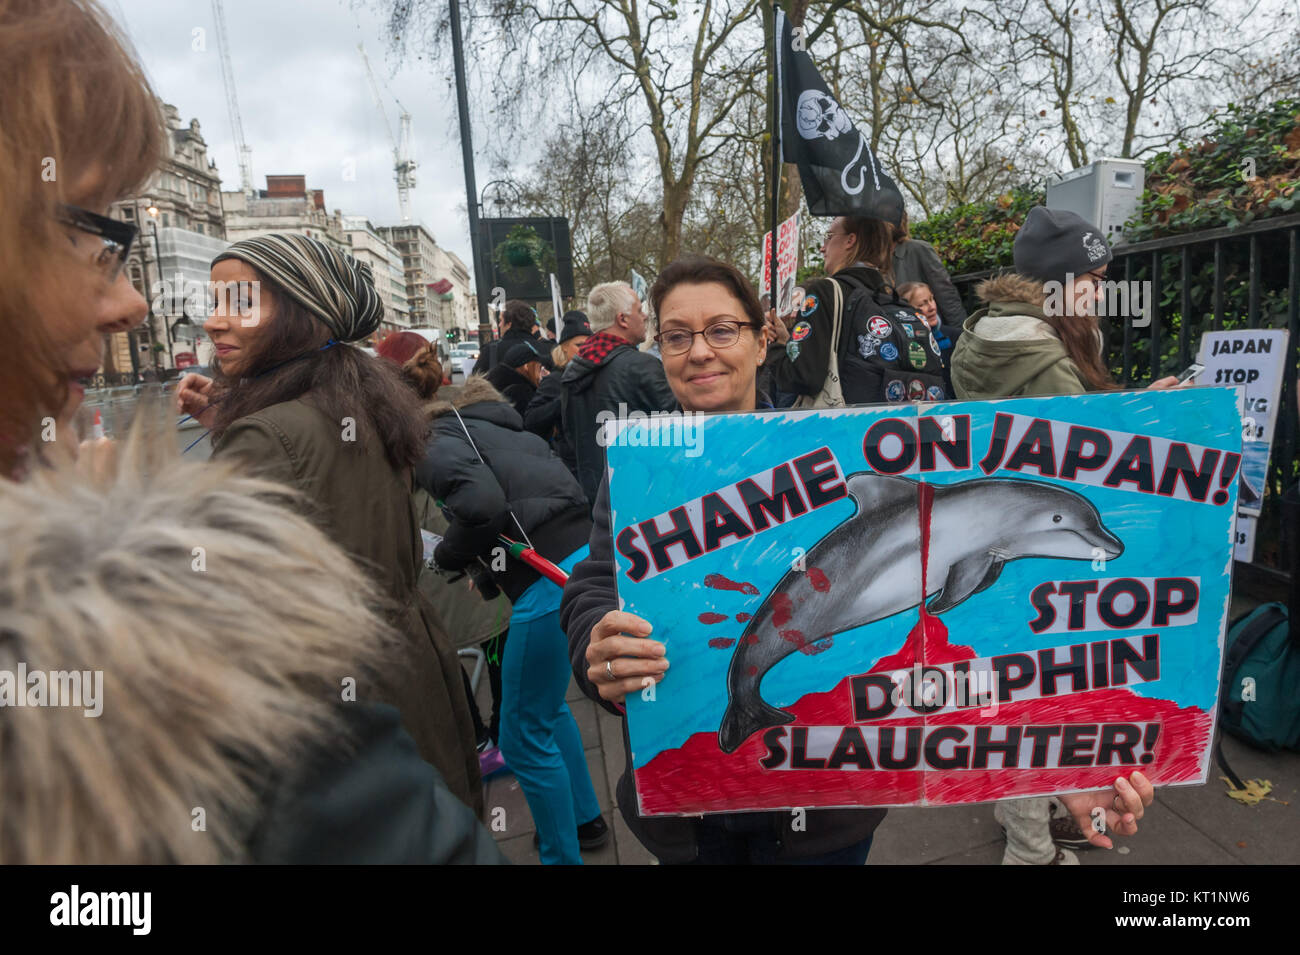 'Shame on Japan - Stop Dolphin Slaughter' reads the placard a woman has brought to the Japanese Embassy in London calling for an end to the brutal wholesale slaughter of dolphins, porpoises and small whales in Taiji Cove in Japan. Stock Photo